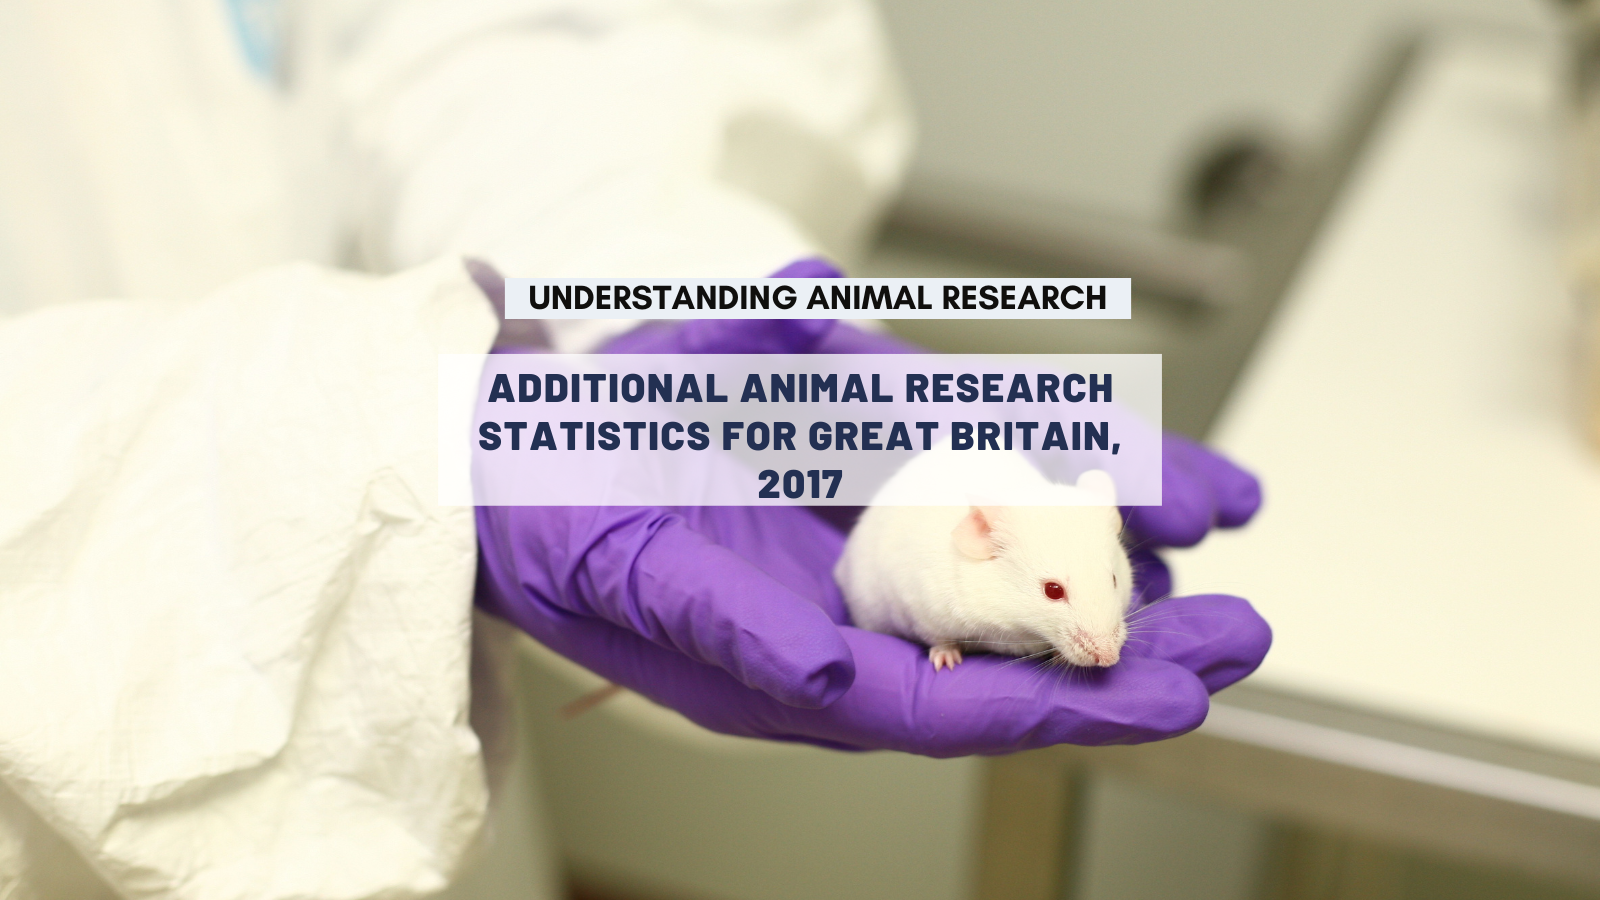 Additional animal research statistics for Great Britain, 2017